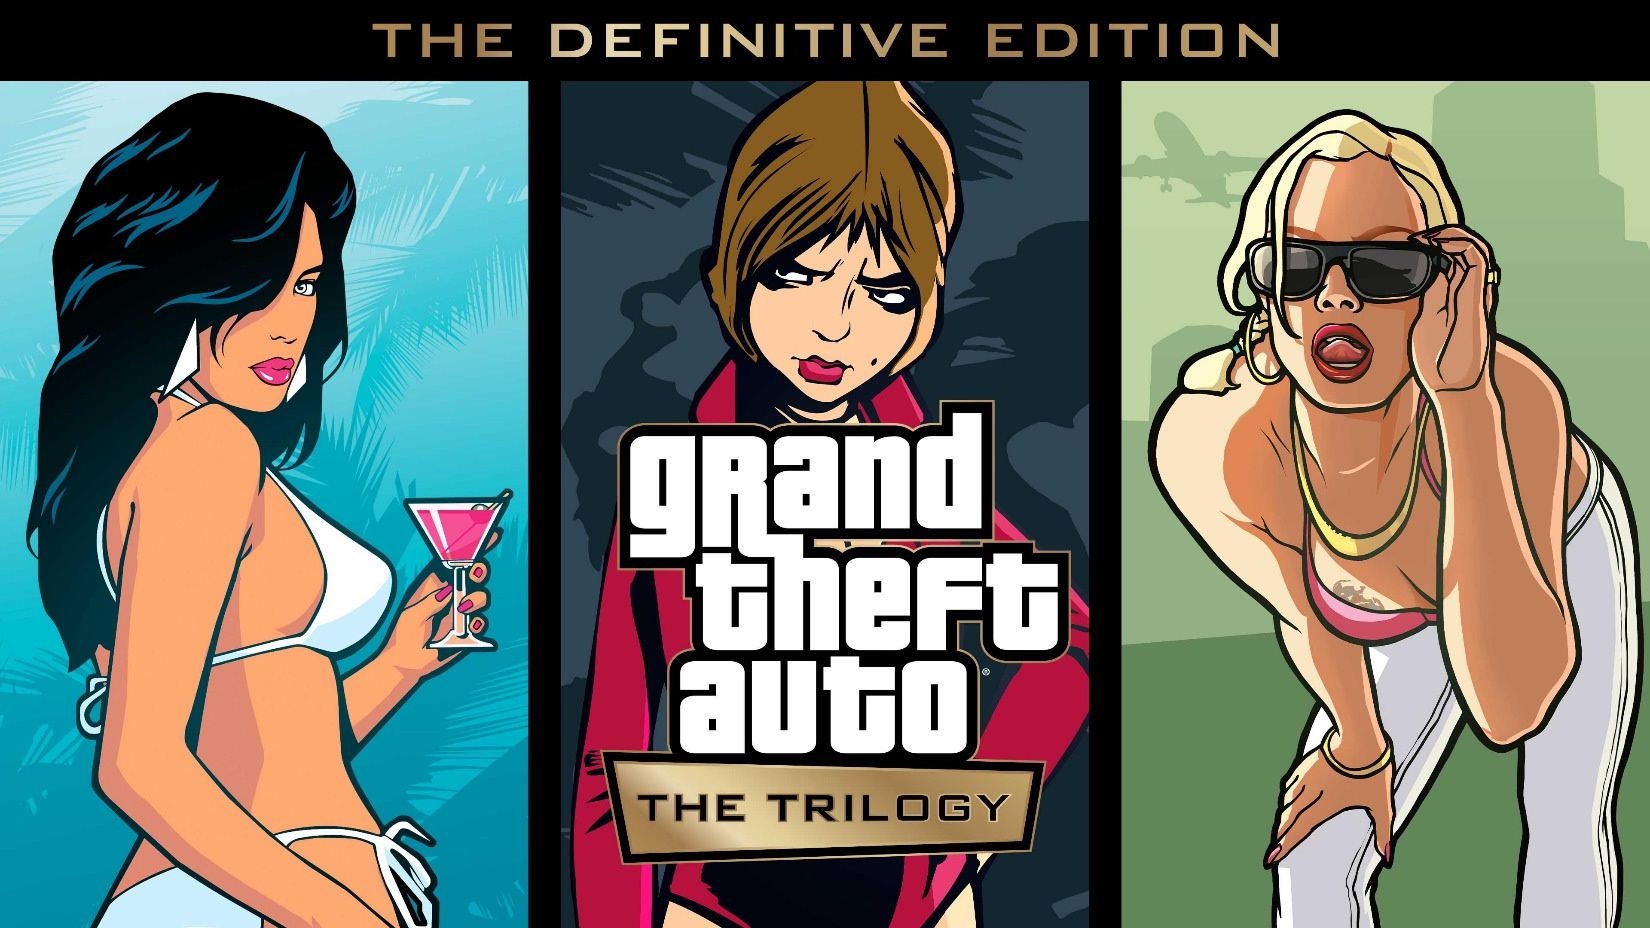 grand-theft-auto-the-trilogy-definitive-edition.jpg